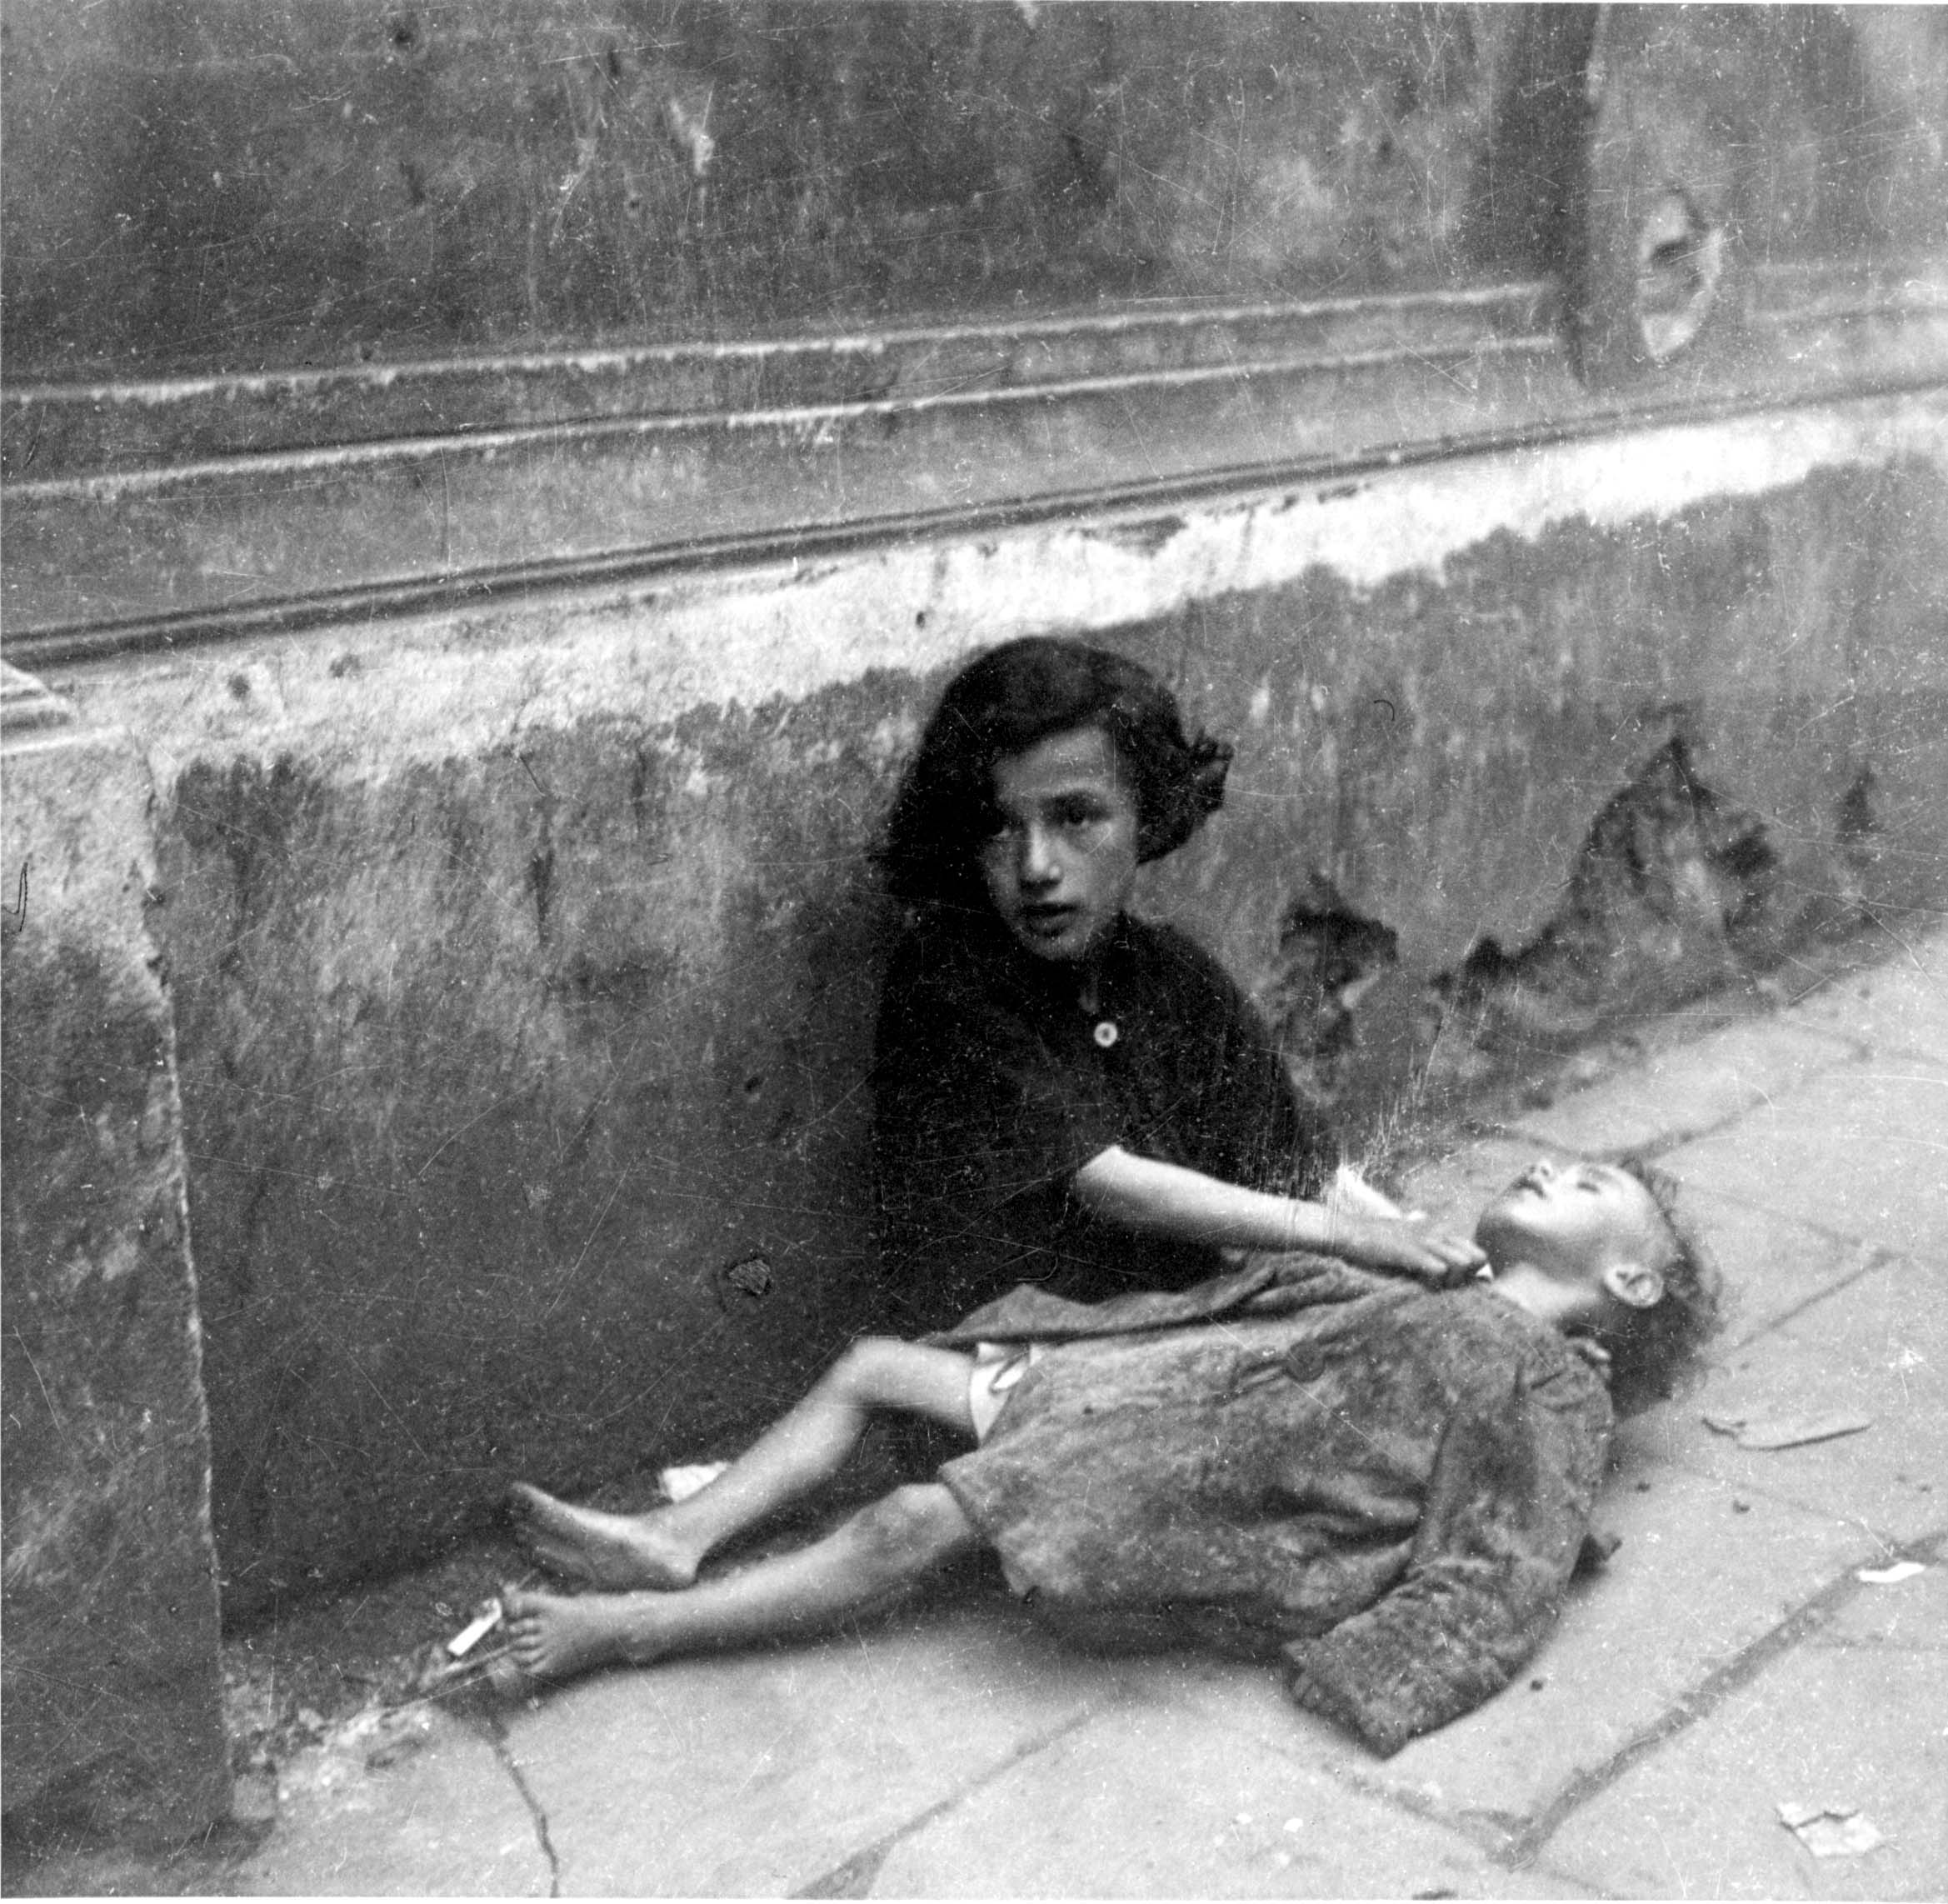 Starving children on the pavement in the ghetto, Warsaw, Poland.